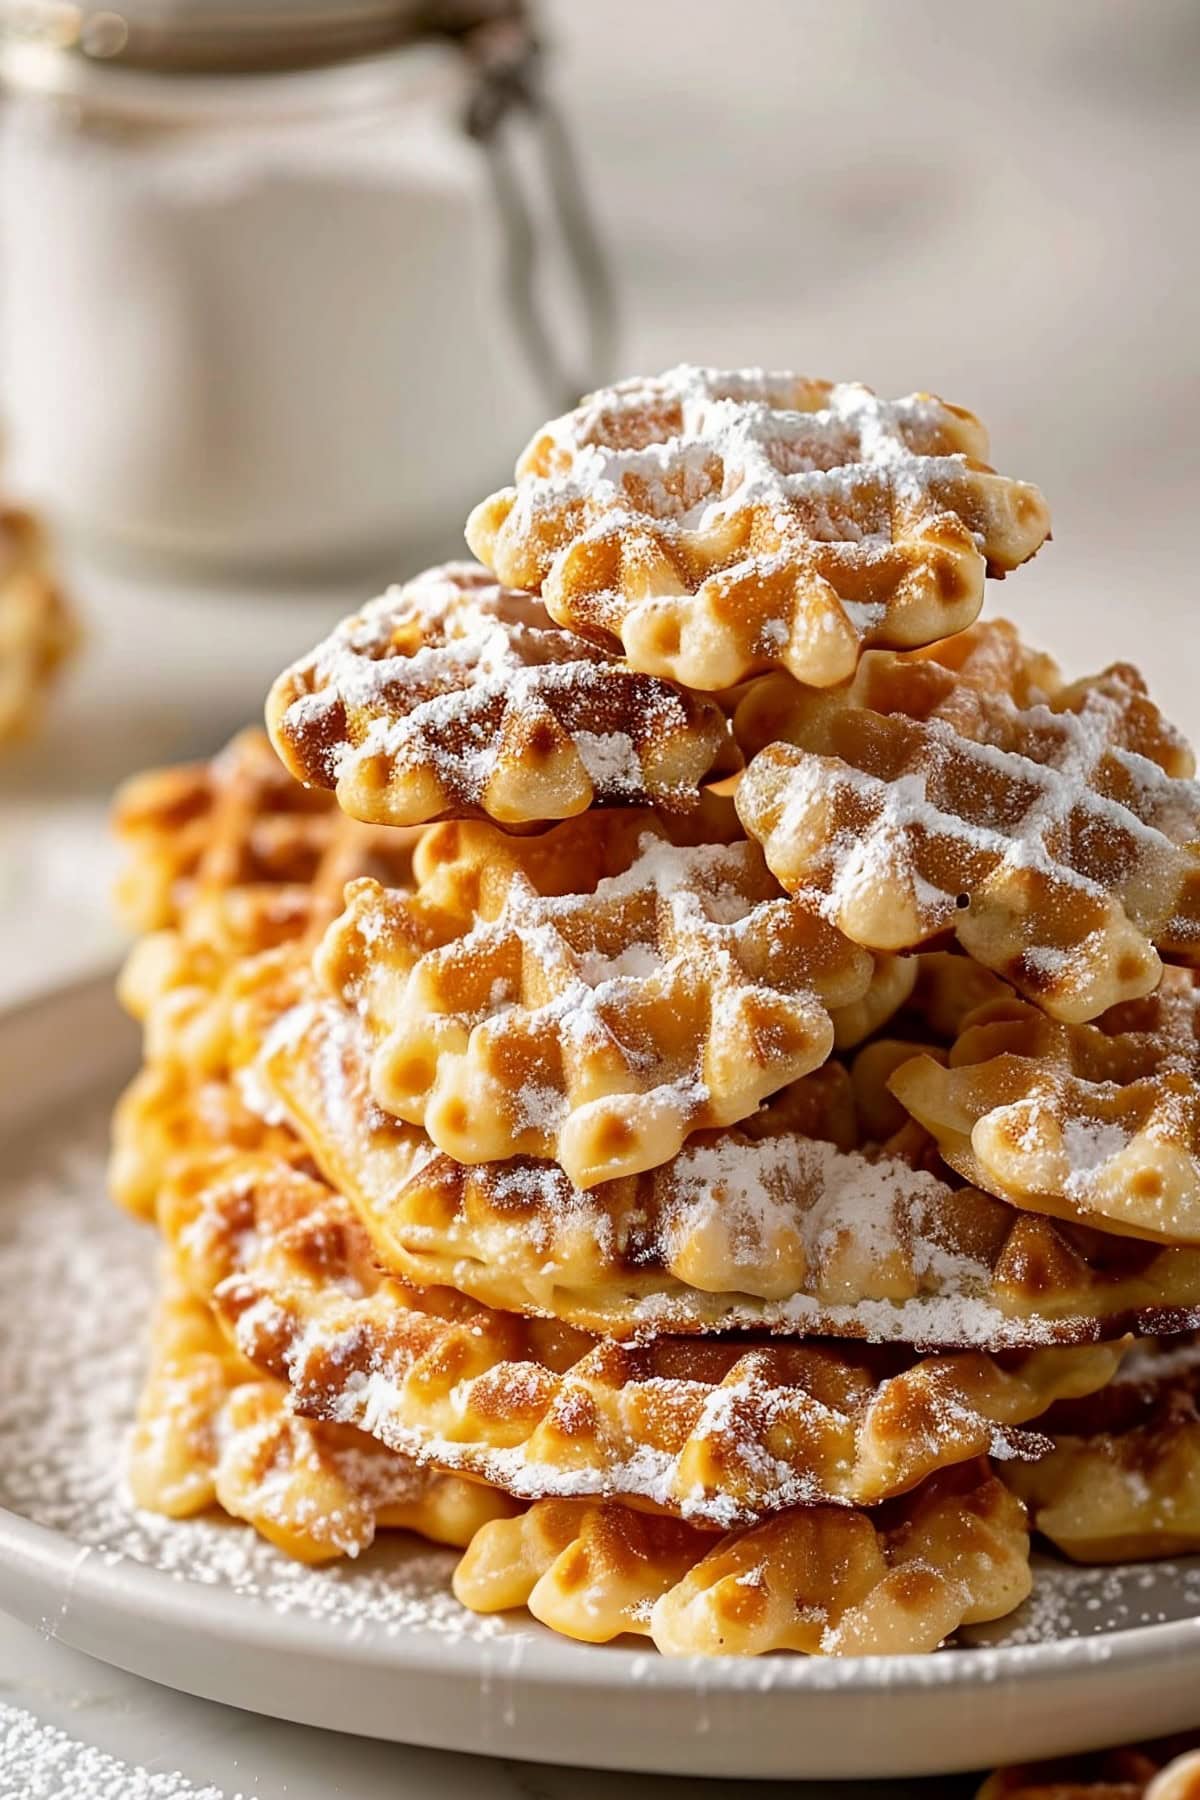 Pile of Waffle Cookies on a White Plate Dusted with Powdered Sugar